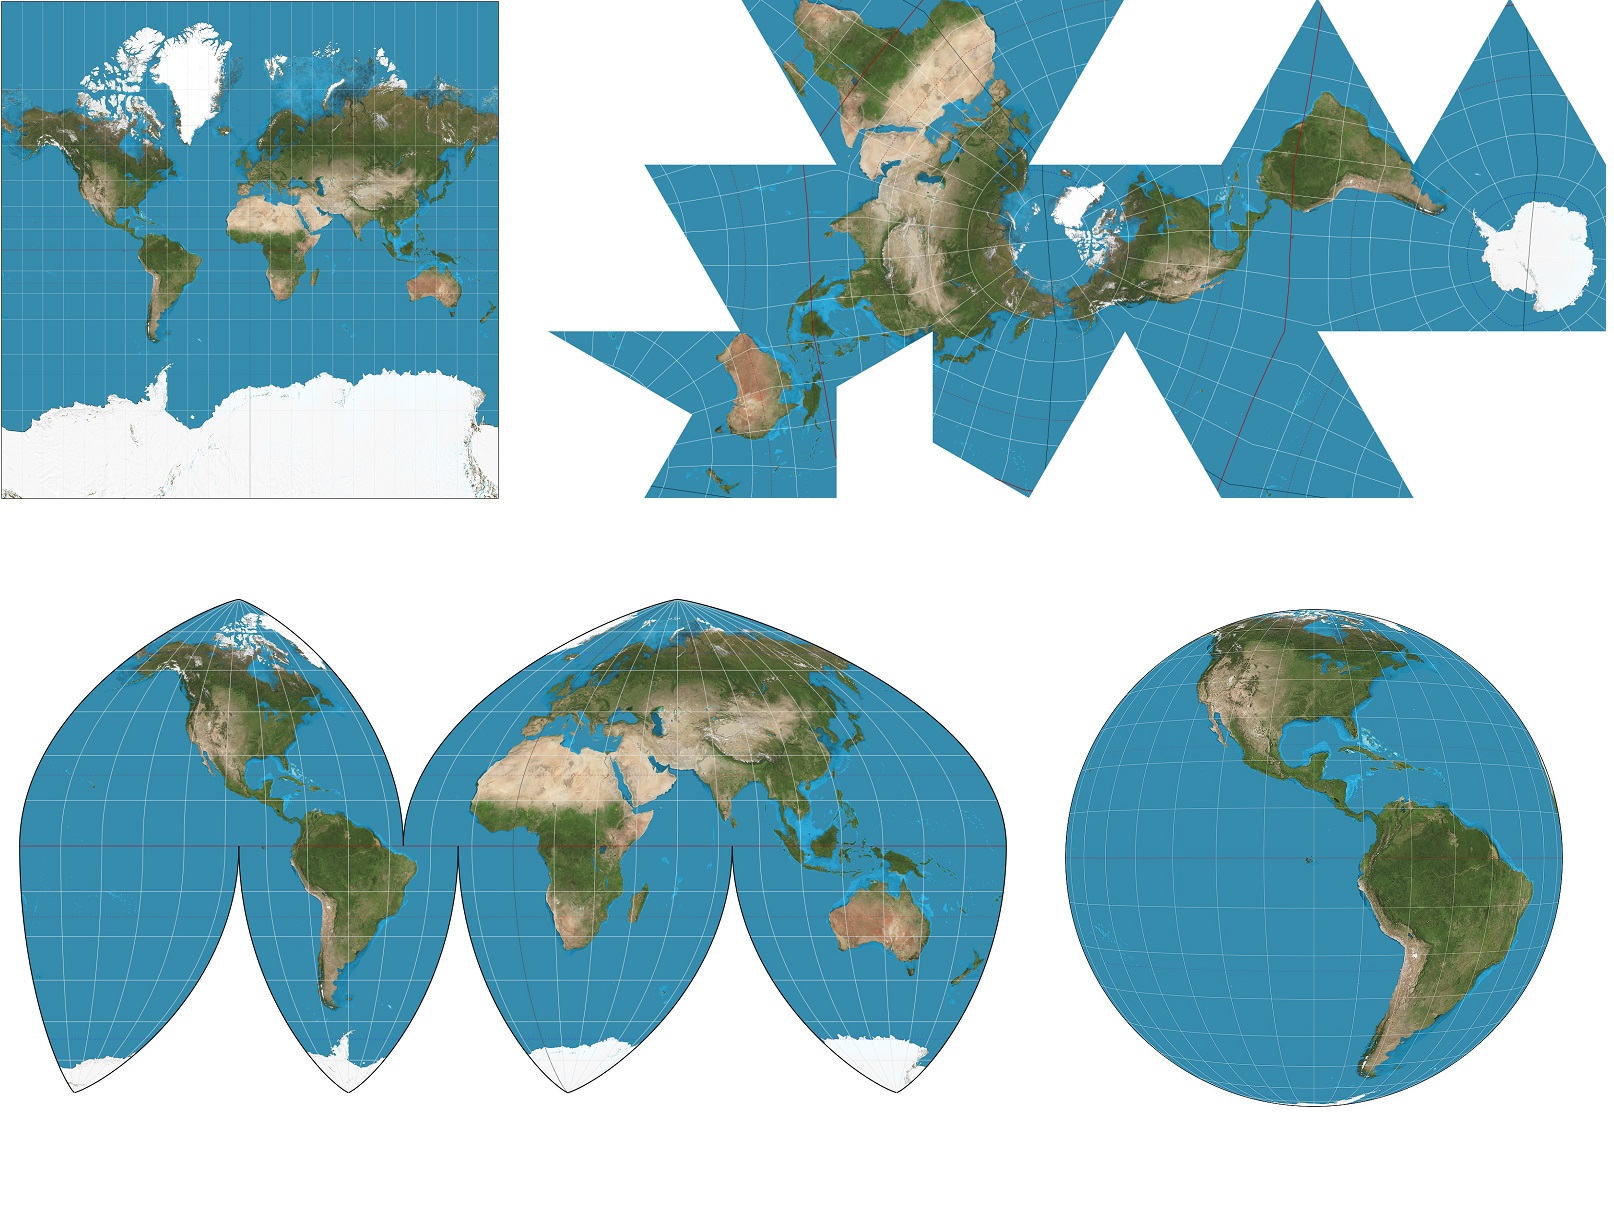 Maps with different projections of the Earth